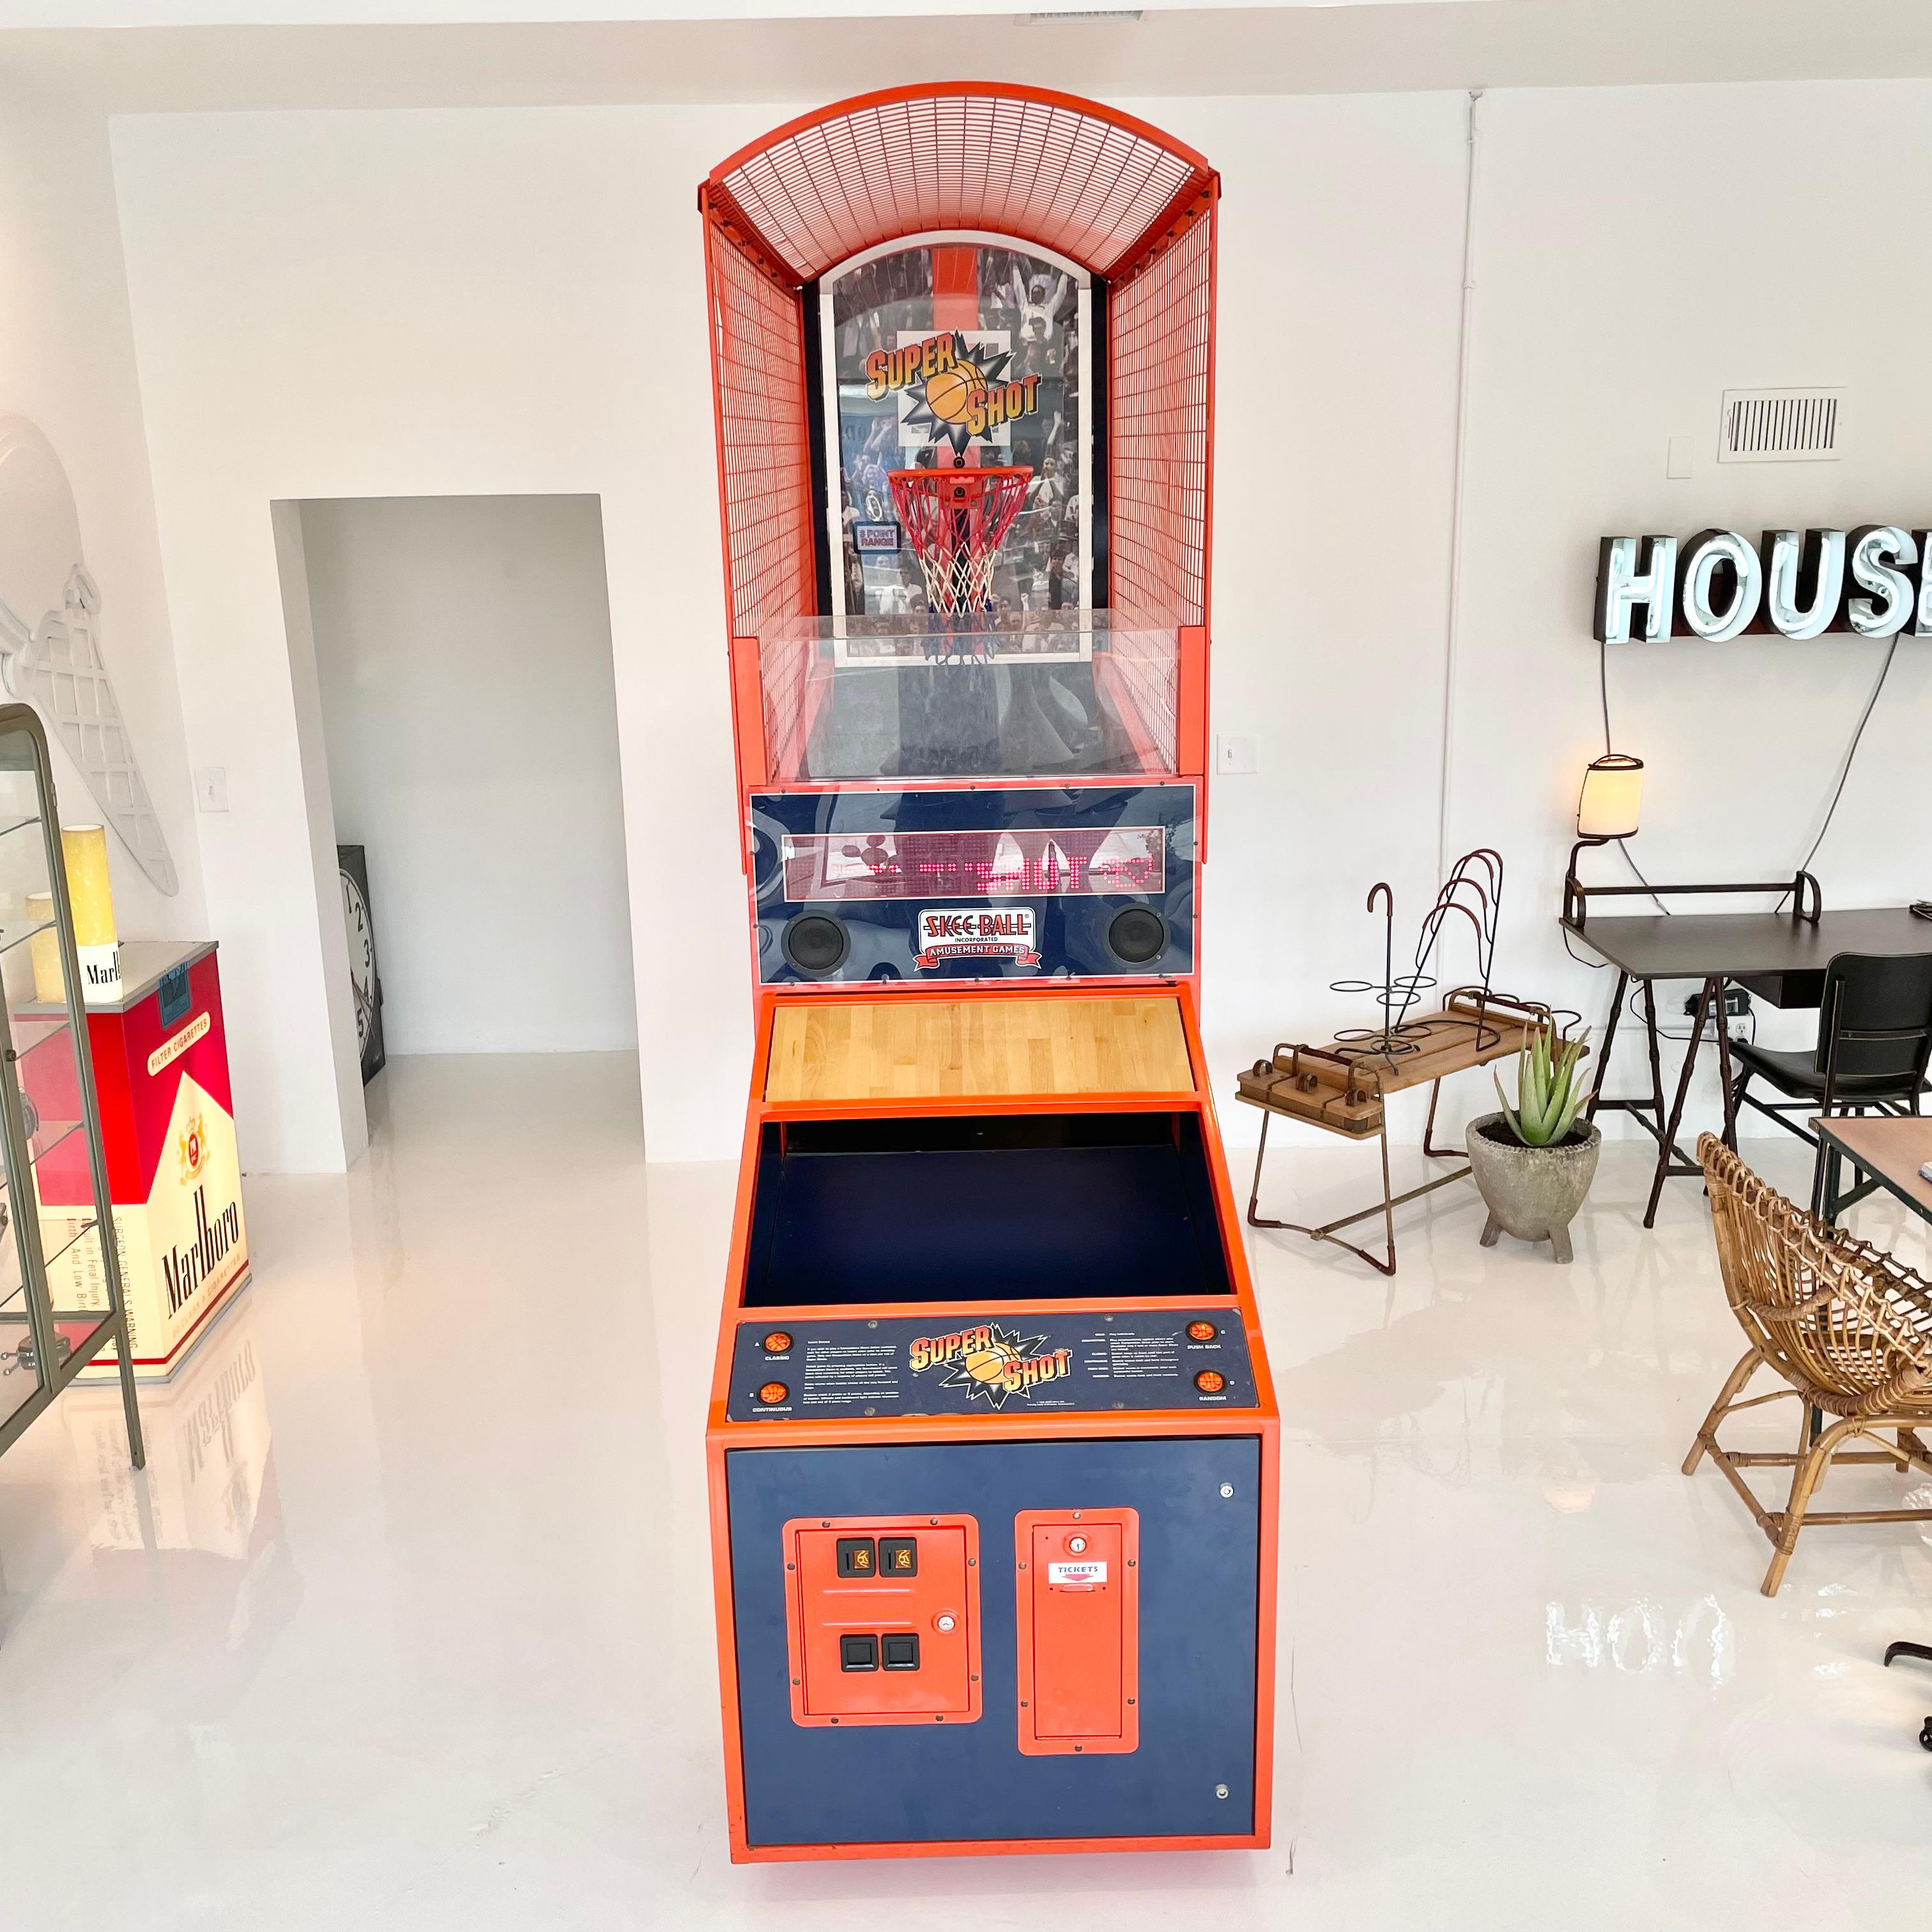 Super shot basketball arcade game made by Skee-Ball. The acrylic backboard moves back and forth for 2 and 3 point baskets/points. 4 different game modes. Perfect working order. Fun piece of nostalgia rom the arcade game era of the 80s and 90s. Comes